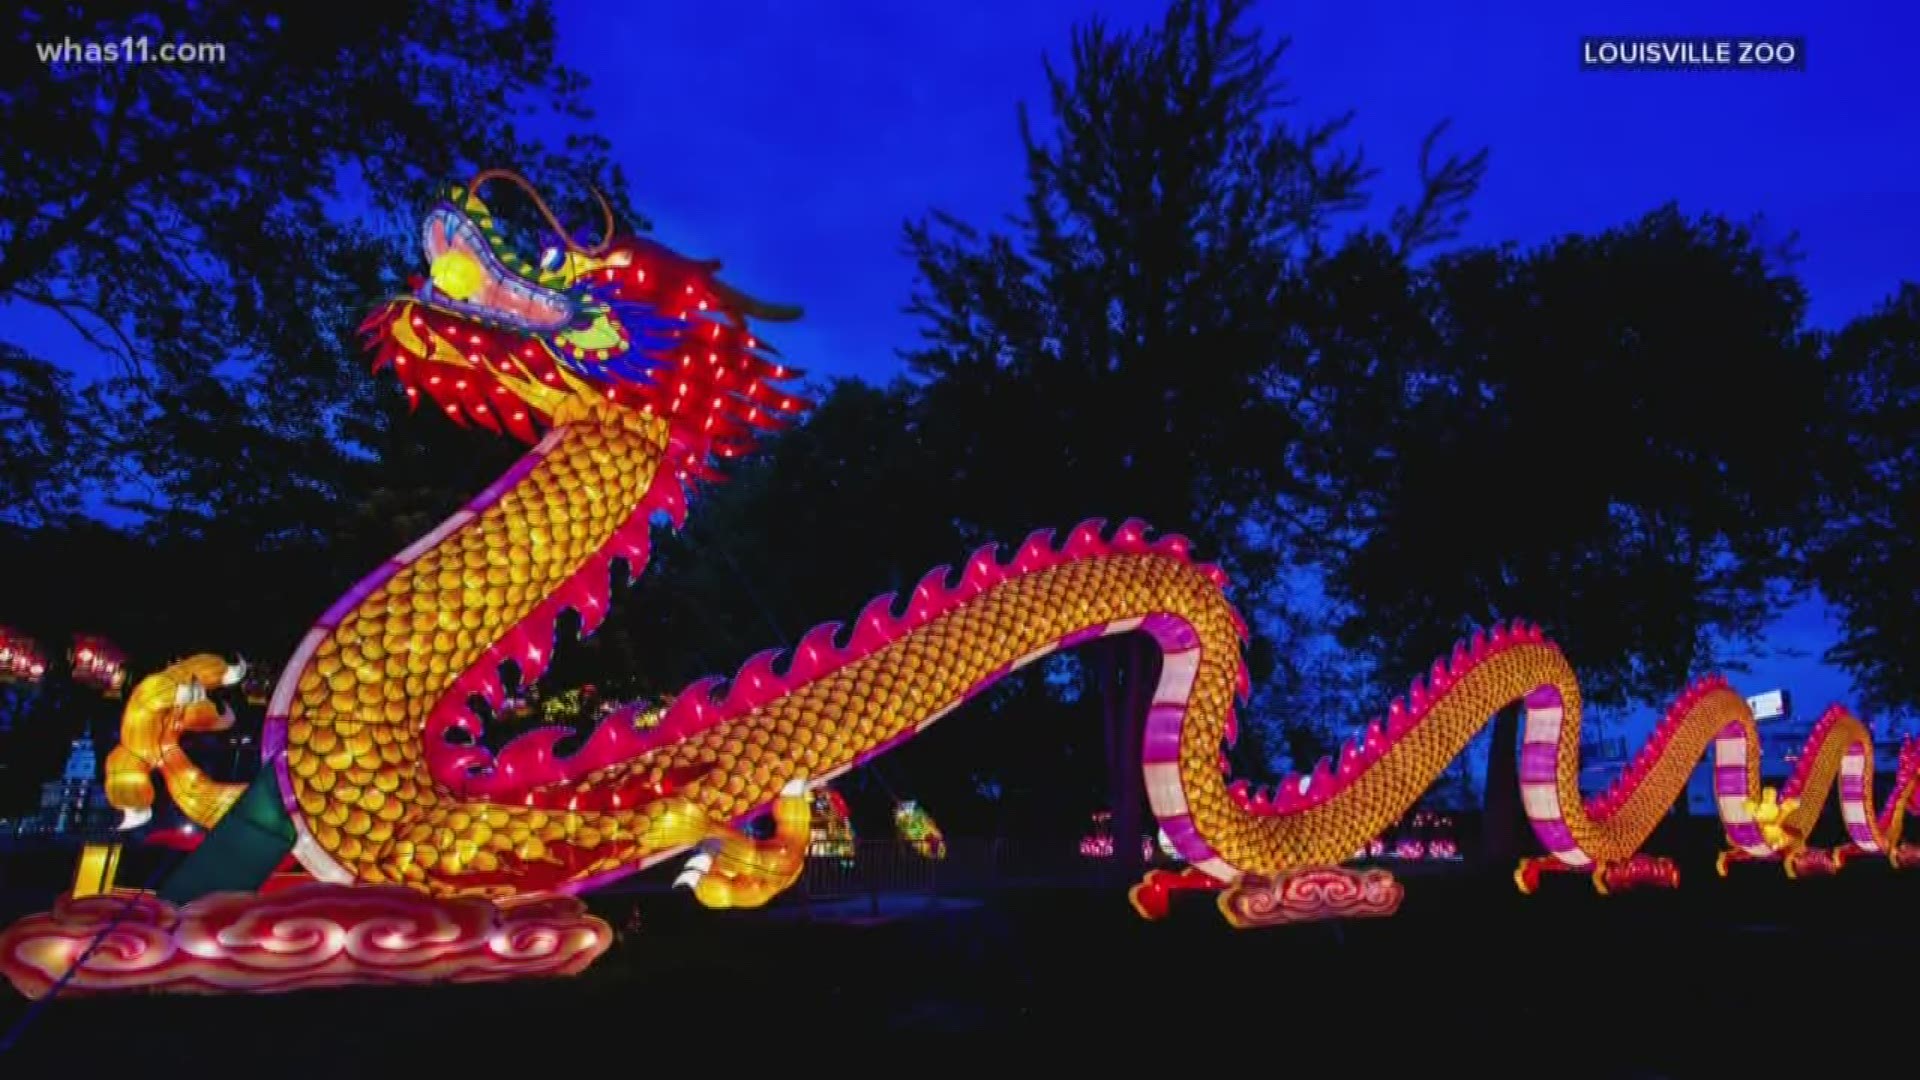 Zoo officials say some of the crowd favorites are expected to be a 131-foot long dragon, an African savanna display, and a color-changing panda tree!